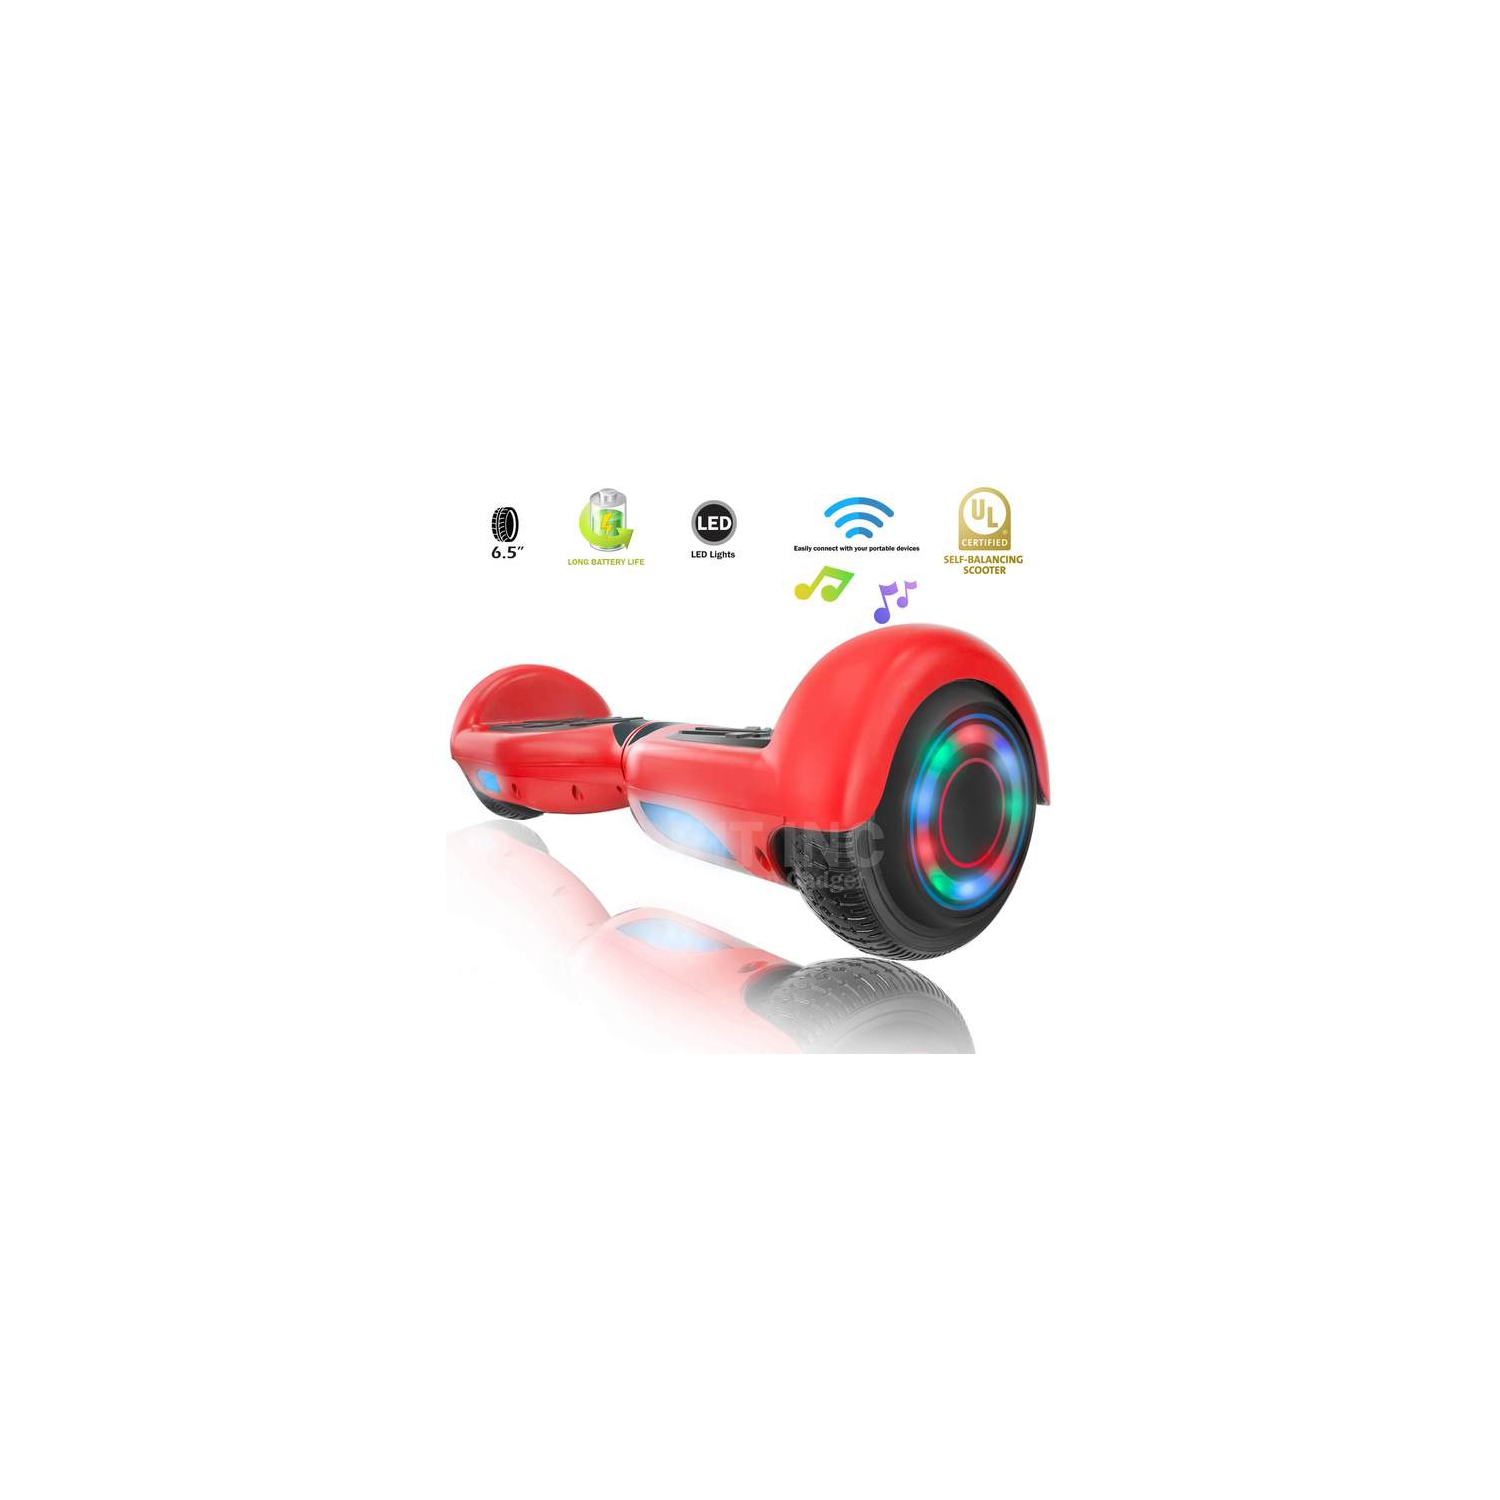 XPRIT 6.5'' Hoverboard for kids, up to 6.4KM Range, Bluetooth Speaker, UL2272-Certified, LED Wheels - Red